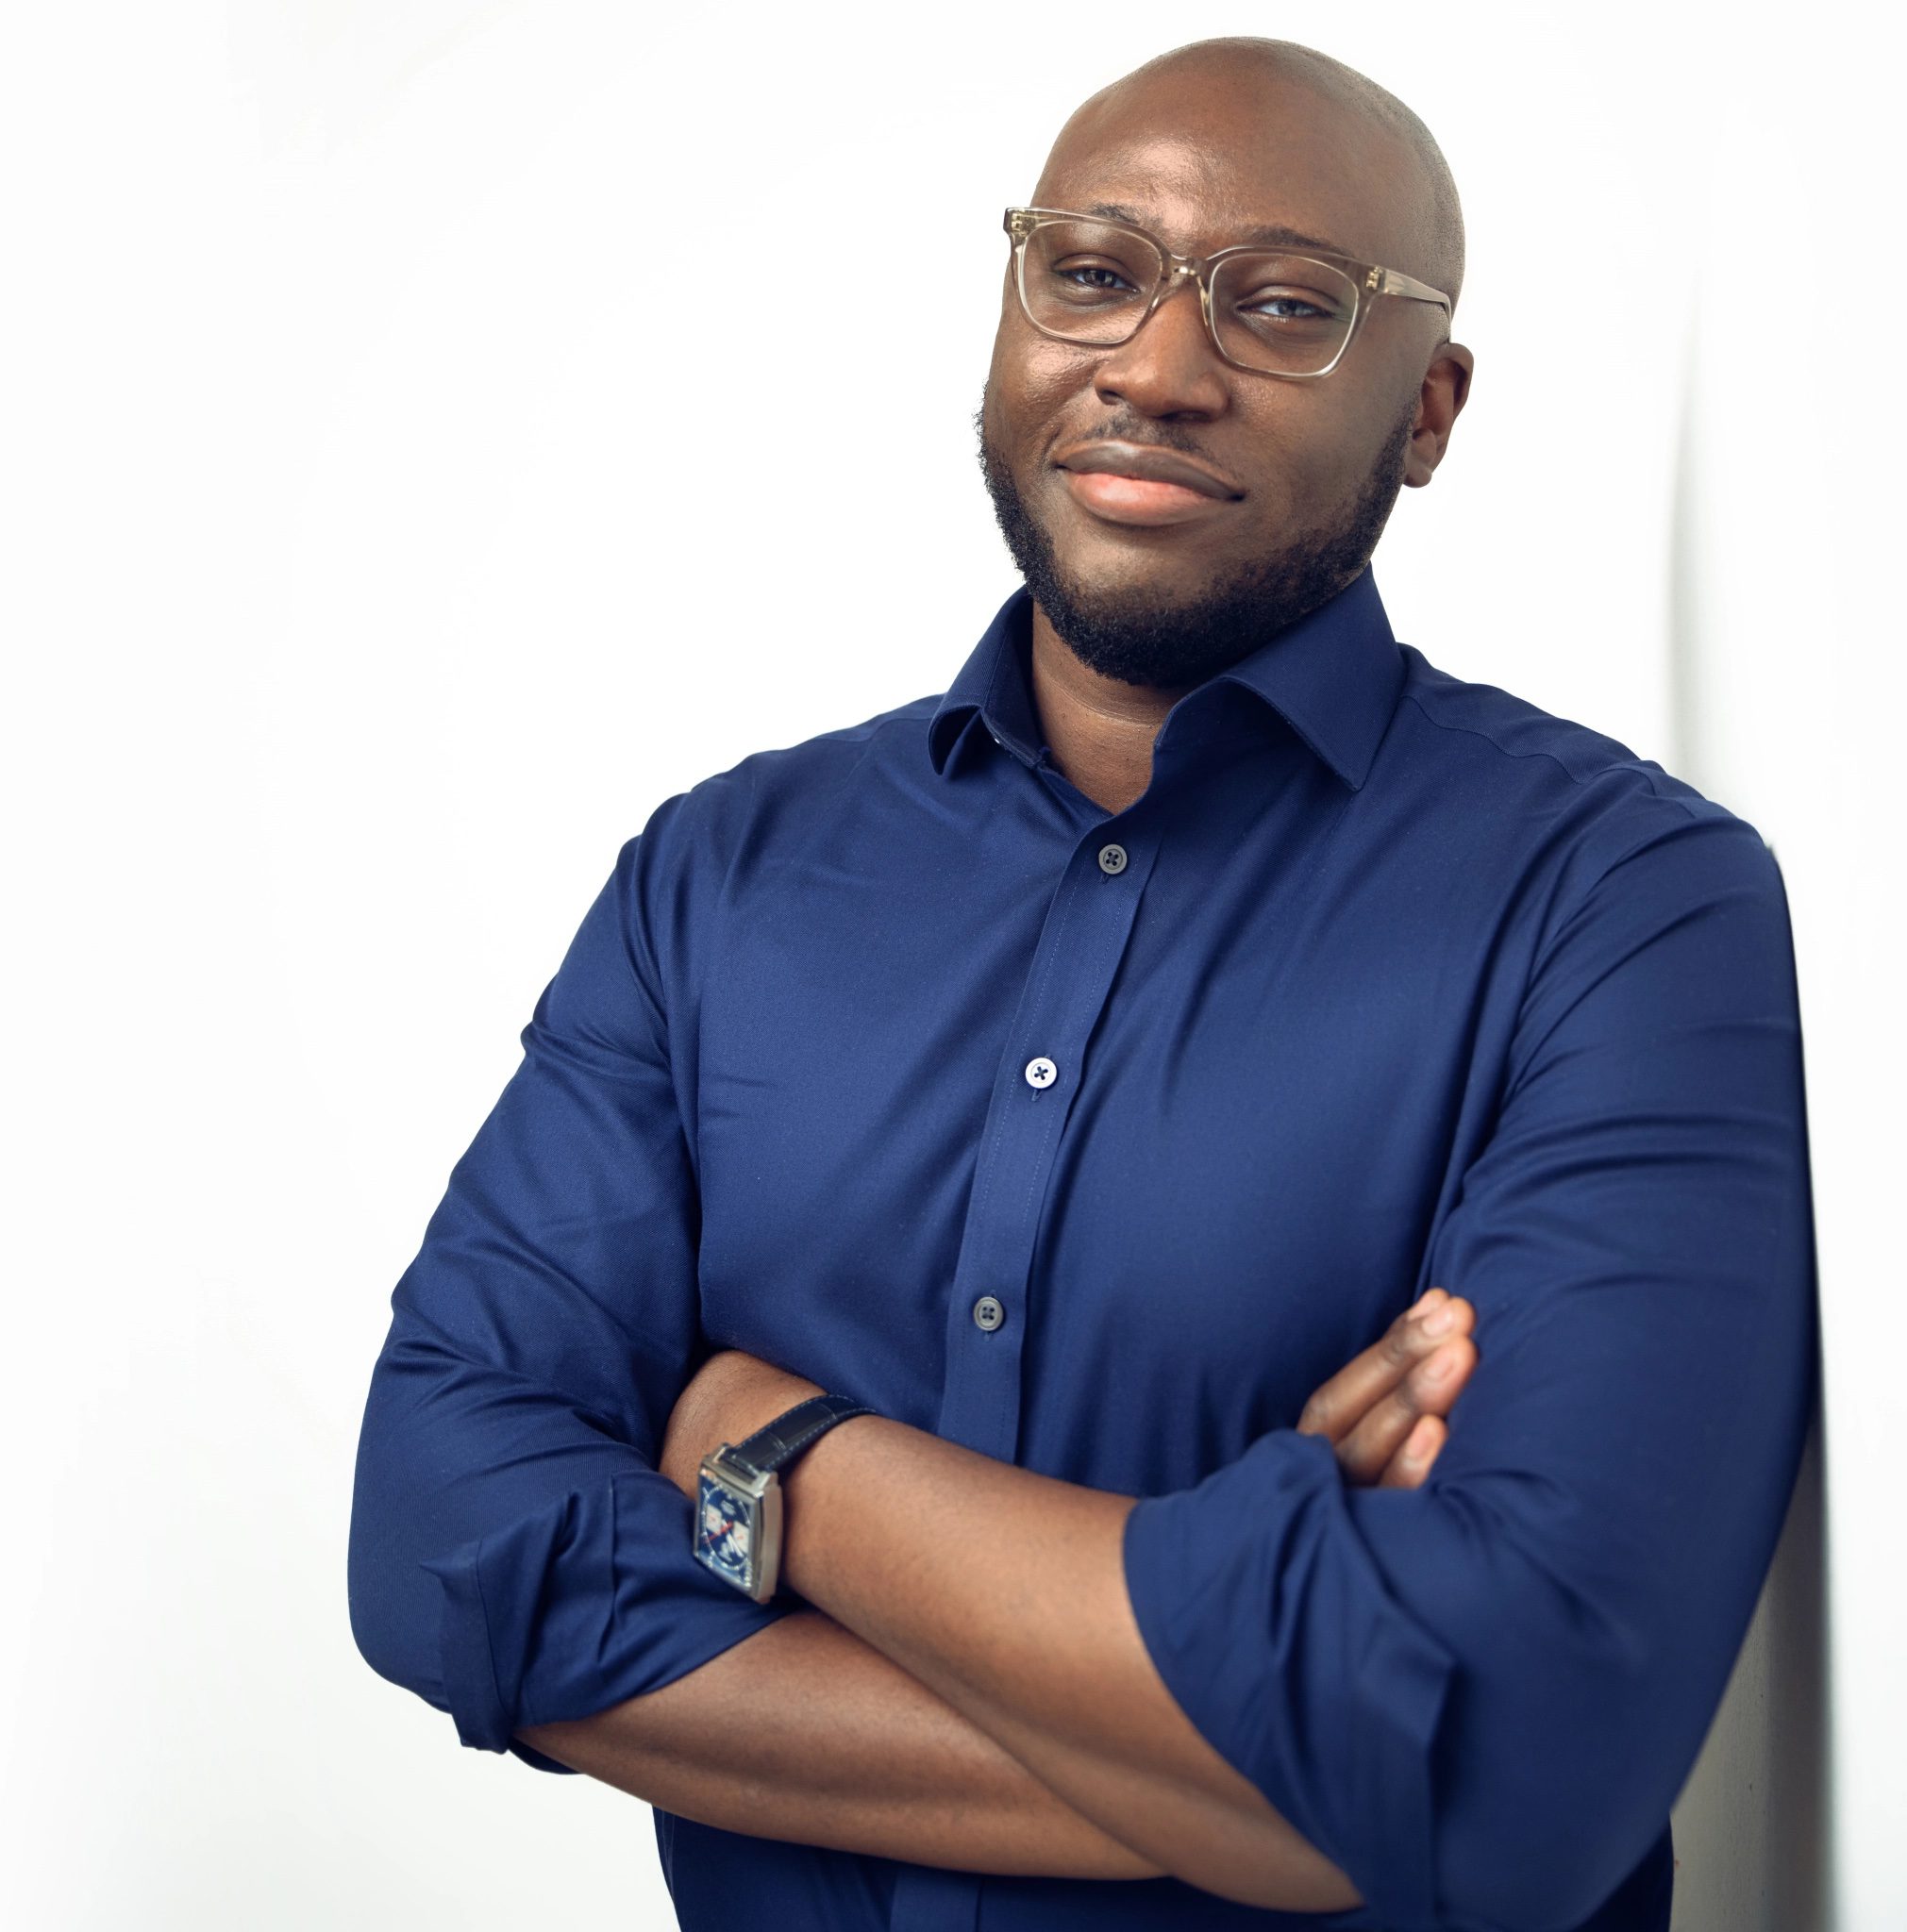 A chat with Abasi Ene-Obong on stepping down as CEO, 54Gene raises more questions